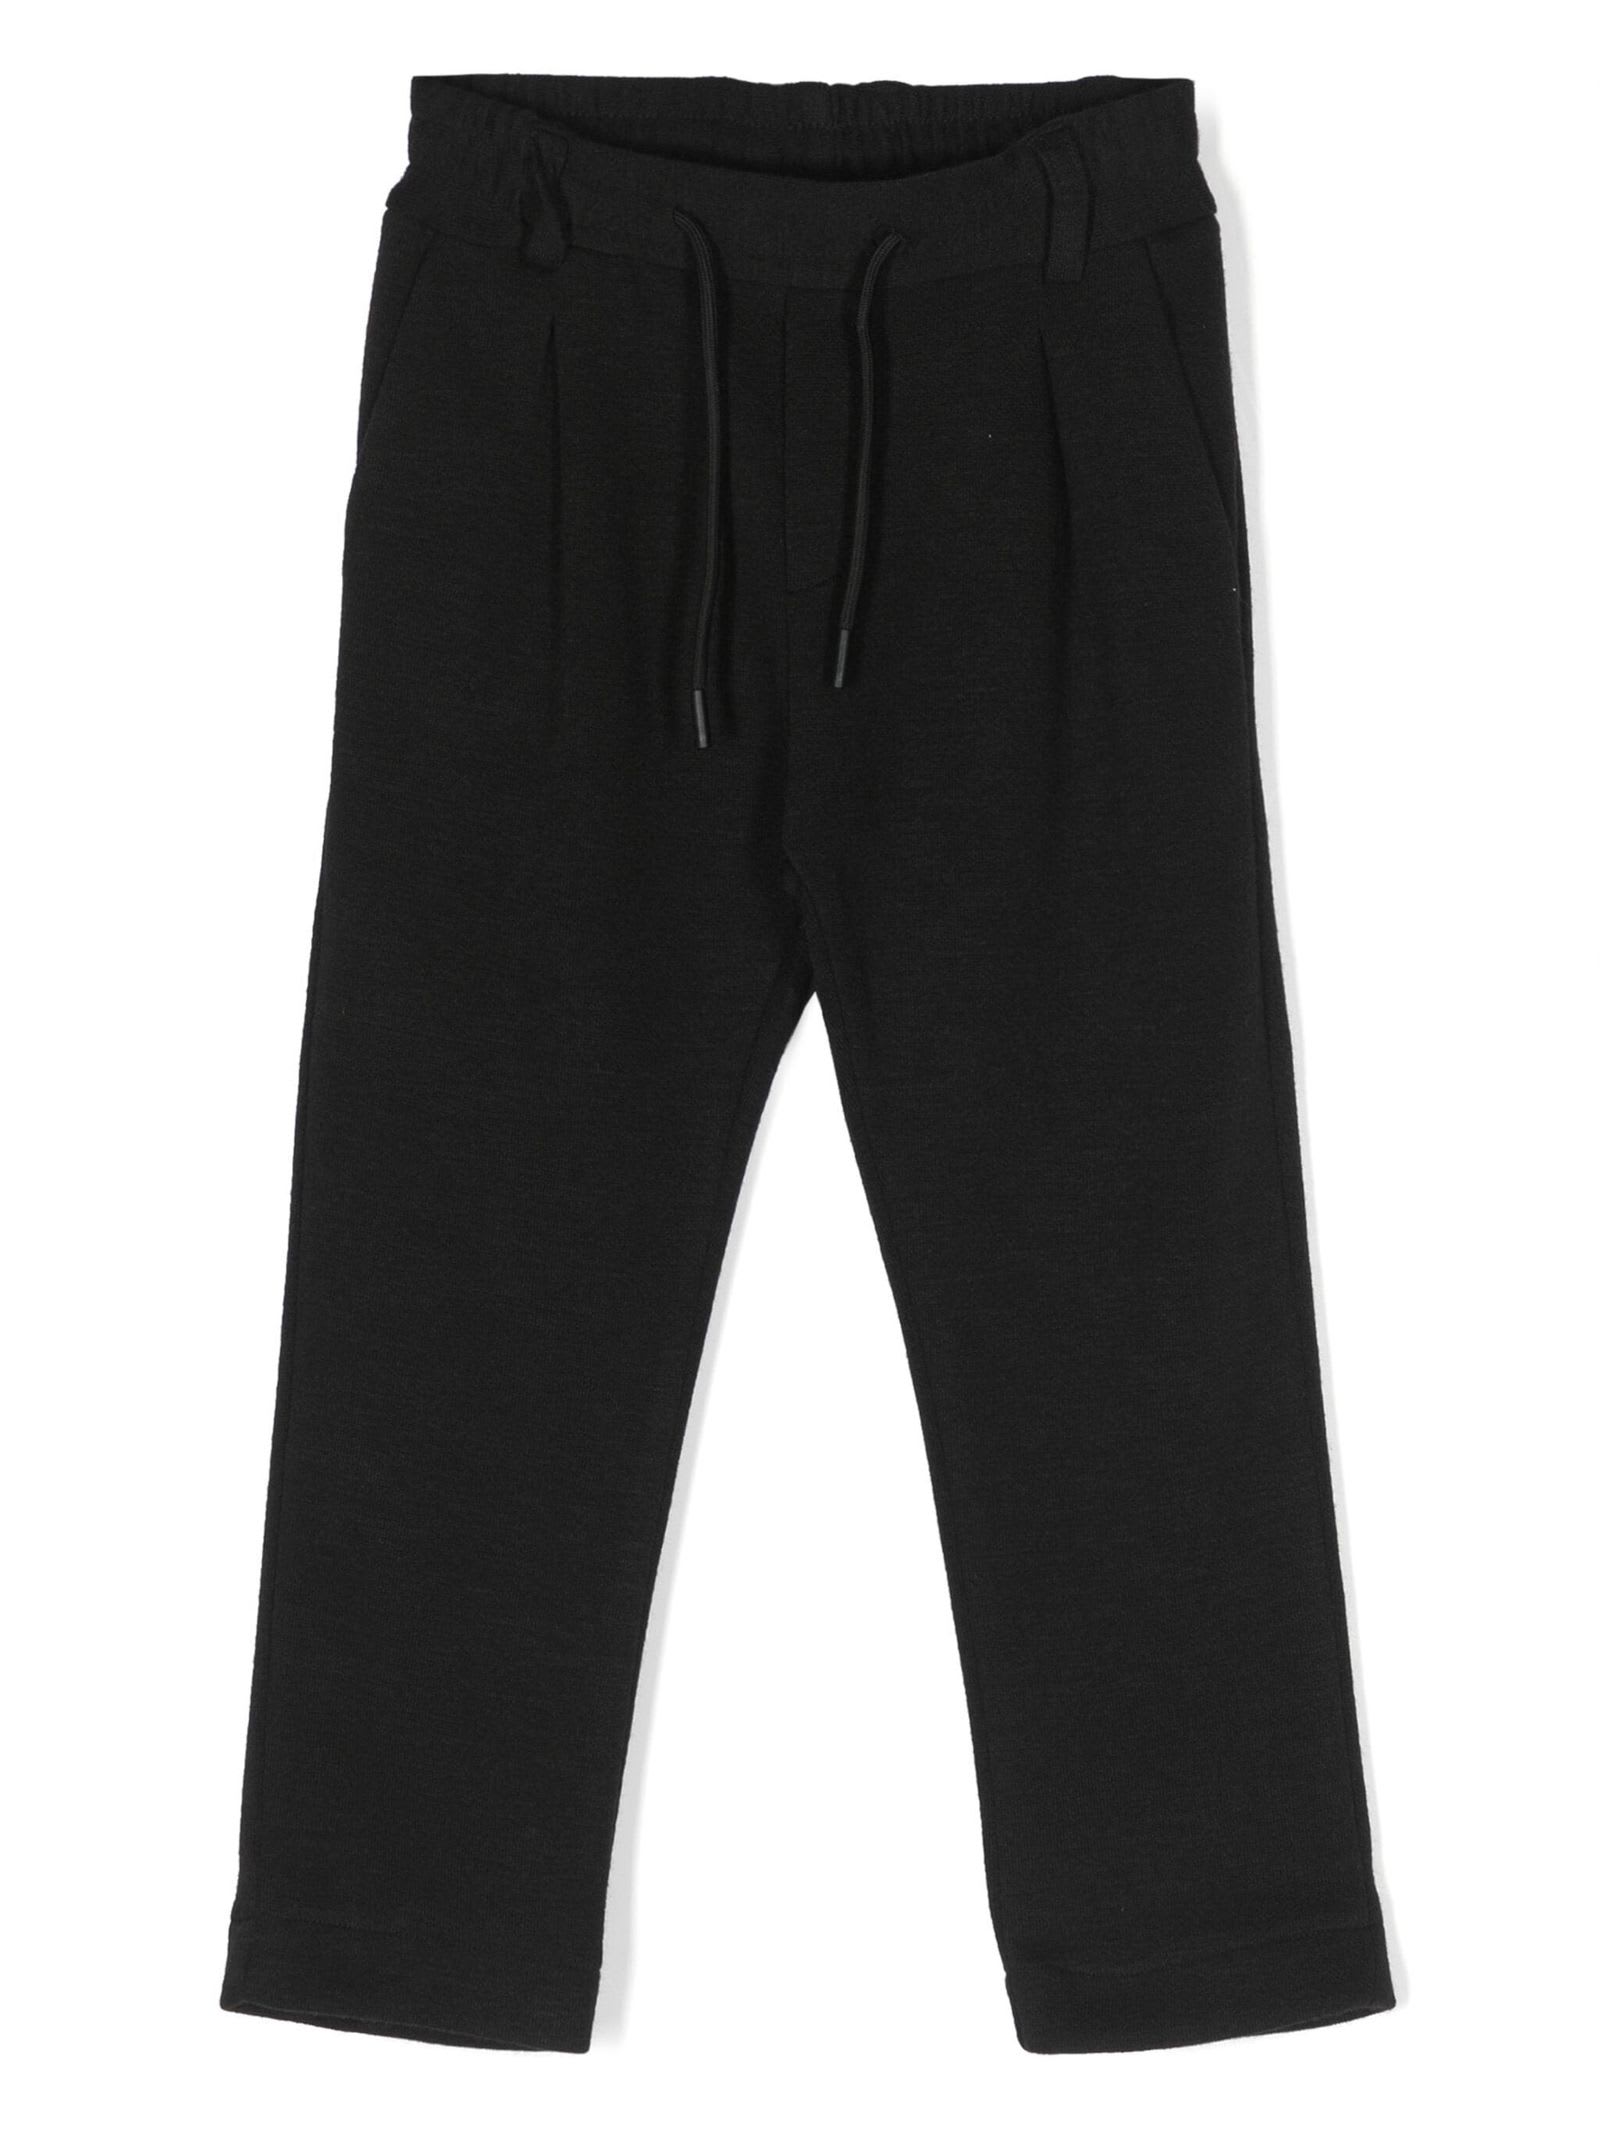 PAOLO PECORA BLACK POLYESTER TROUSERS